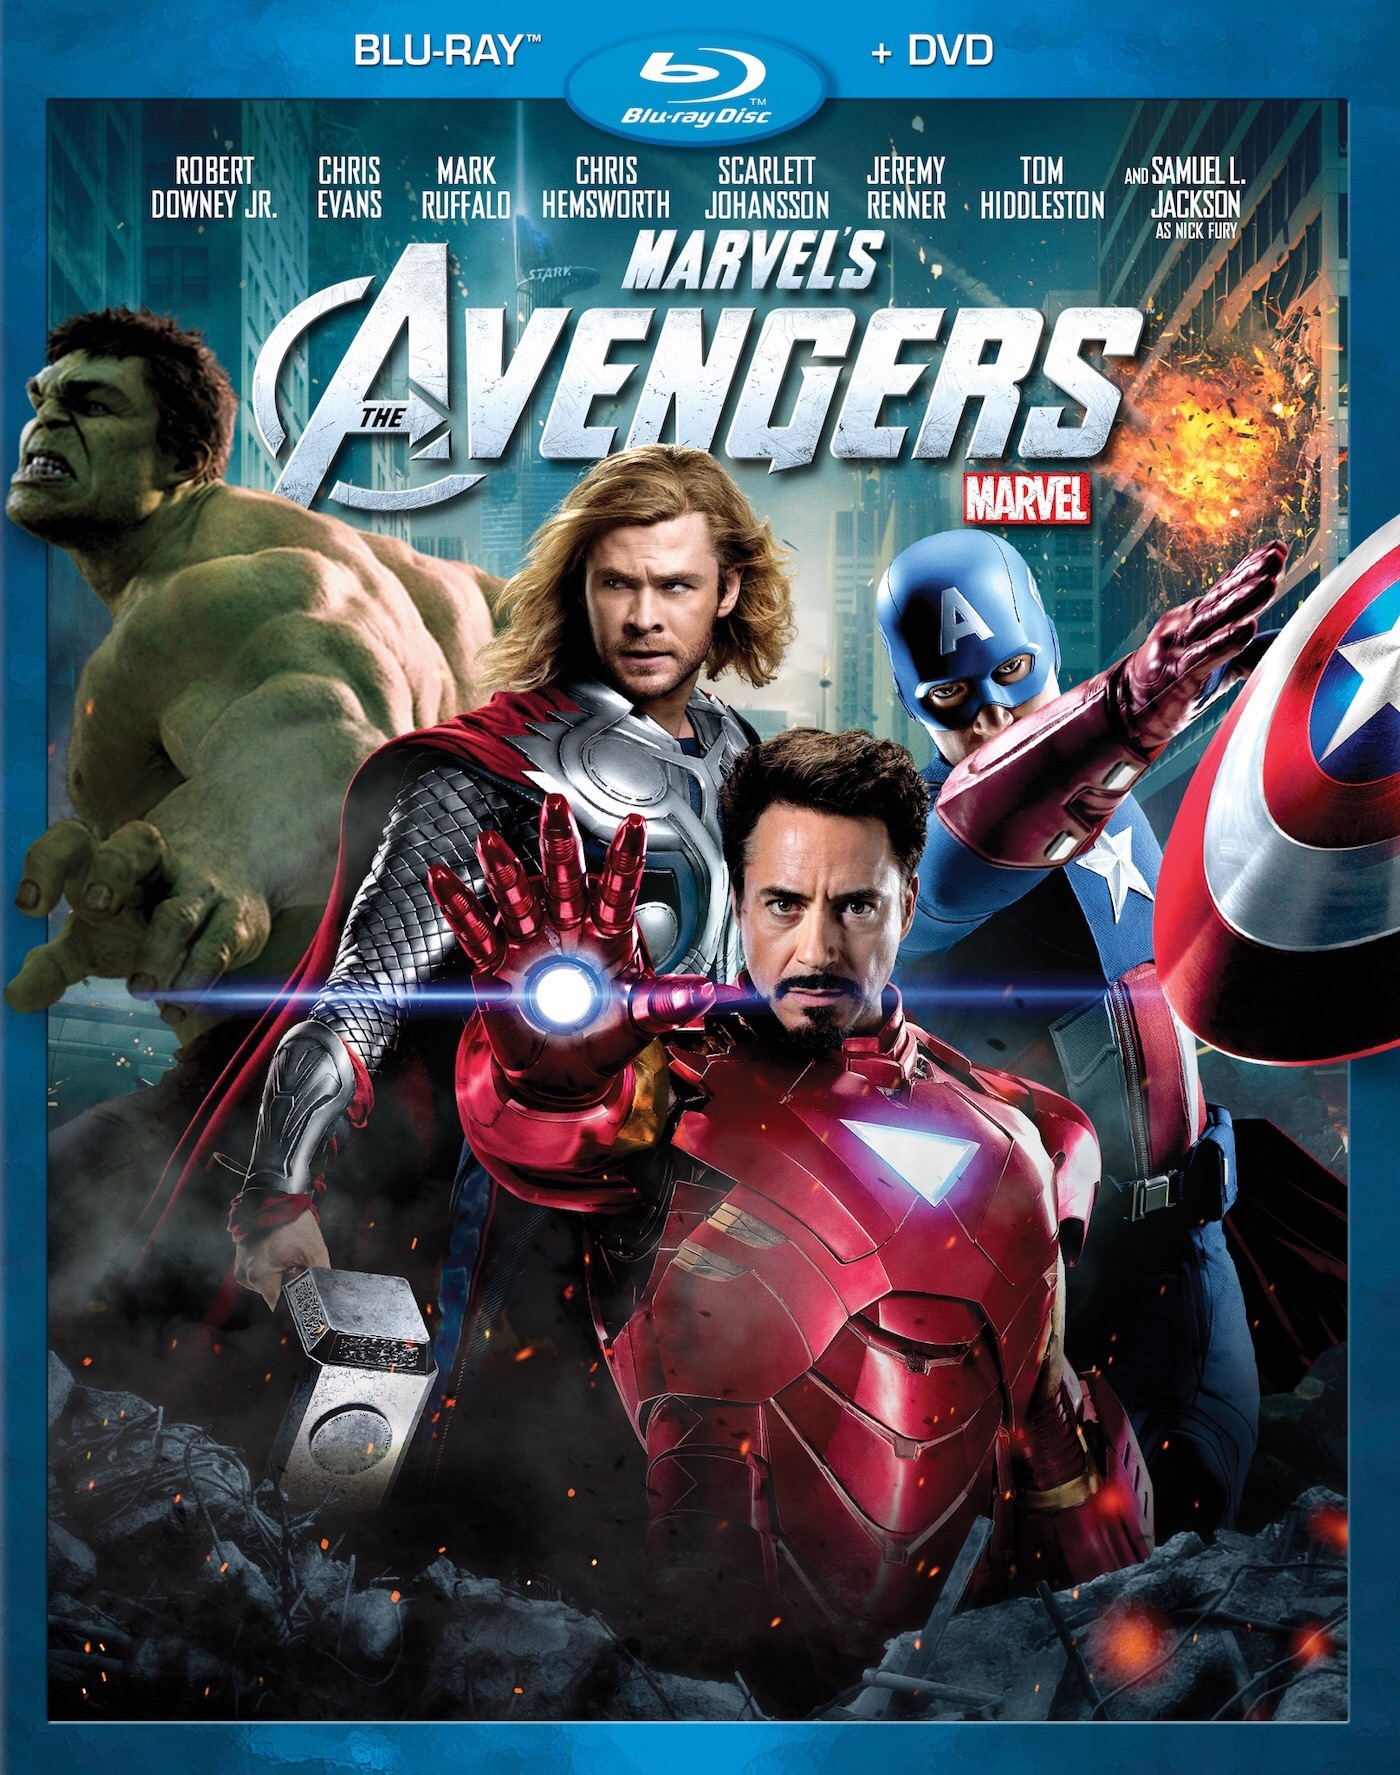 The Avengers download the last version for android